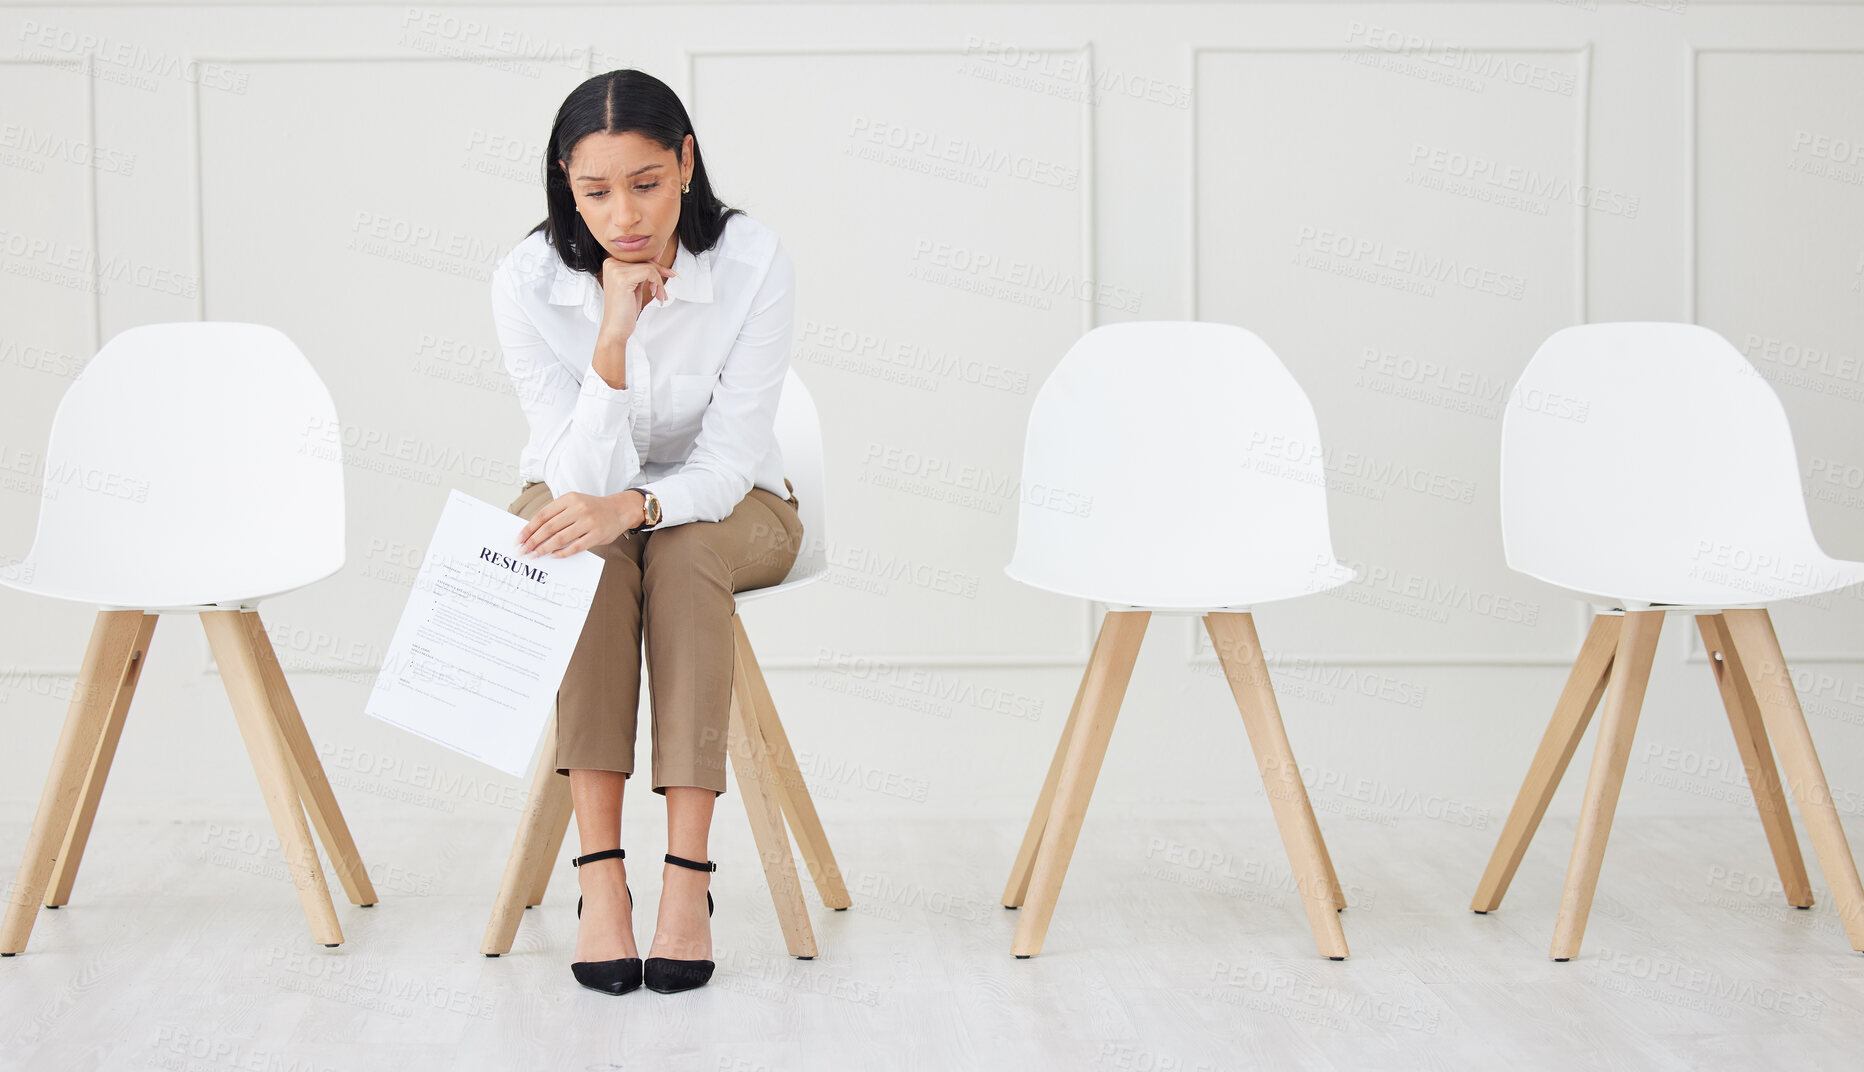 Buy stock photo Full length of mixed race businesswoman waiting for interview. One young stressed applicant sitting alone. Sad ethnic professional holding resume in line for job opening, vacancy, office opportunity